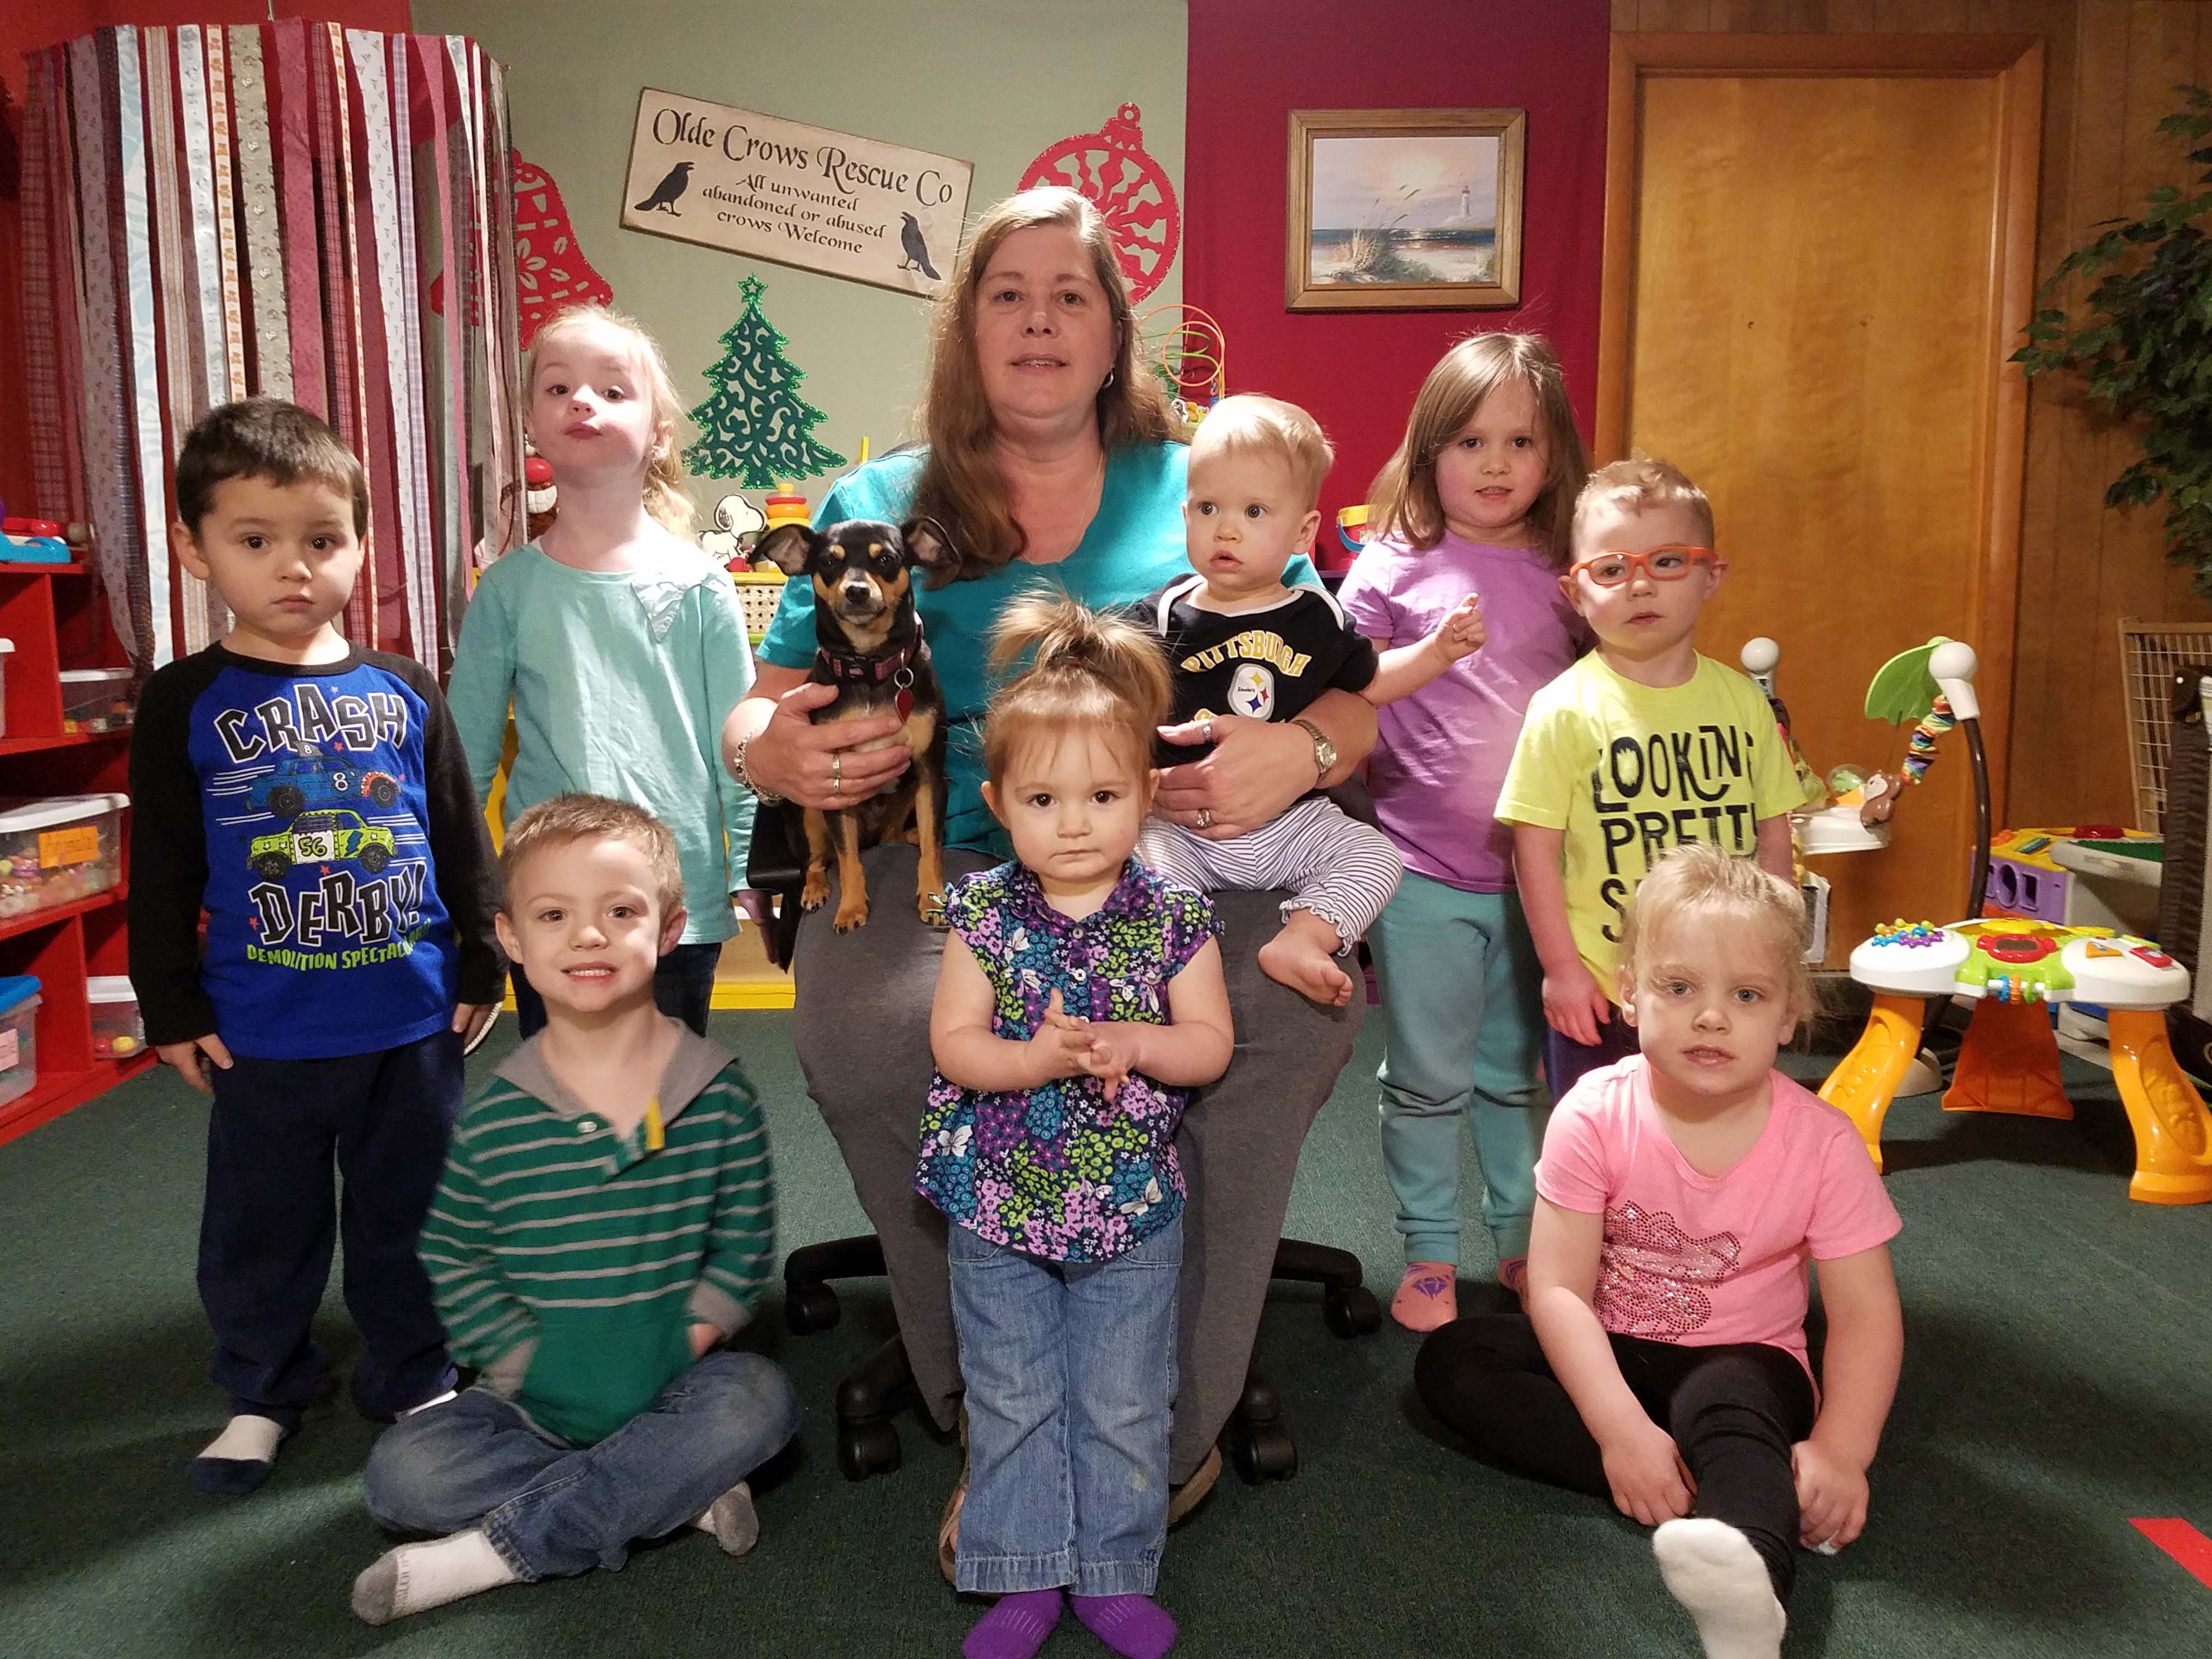 Nancy Rife in the center of a photo, surrounded by eight children under her care.